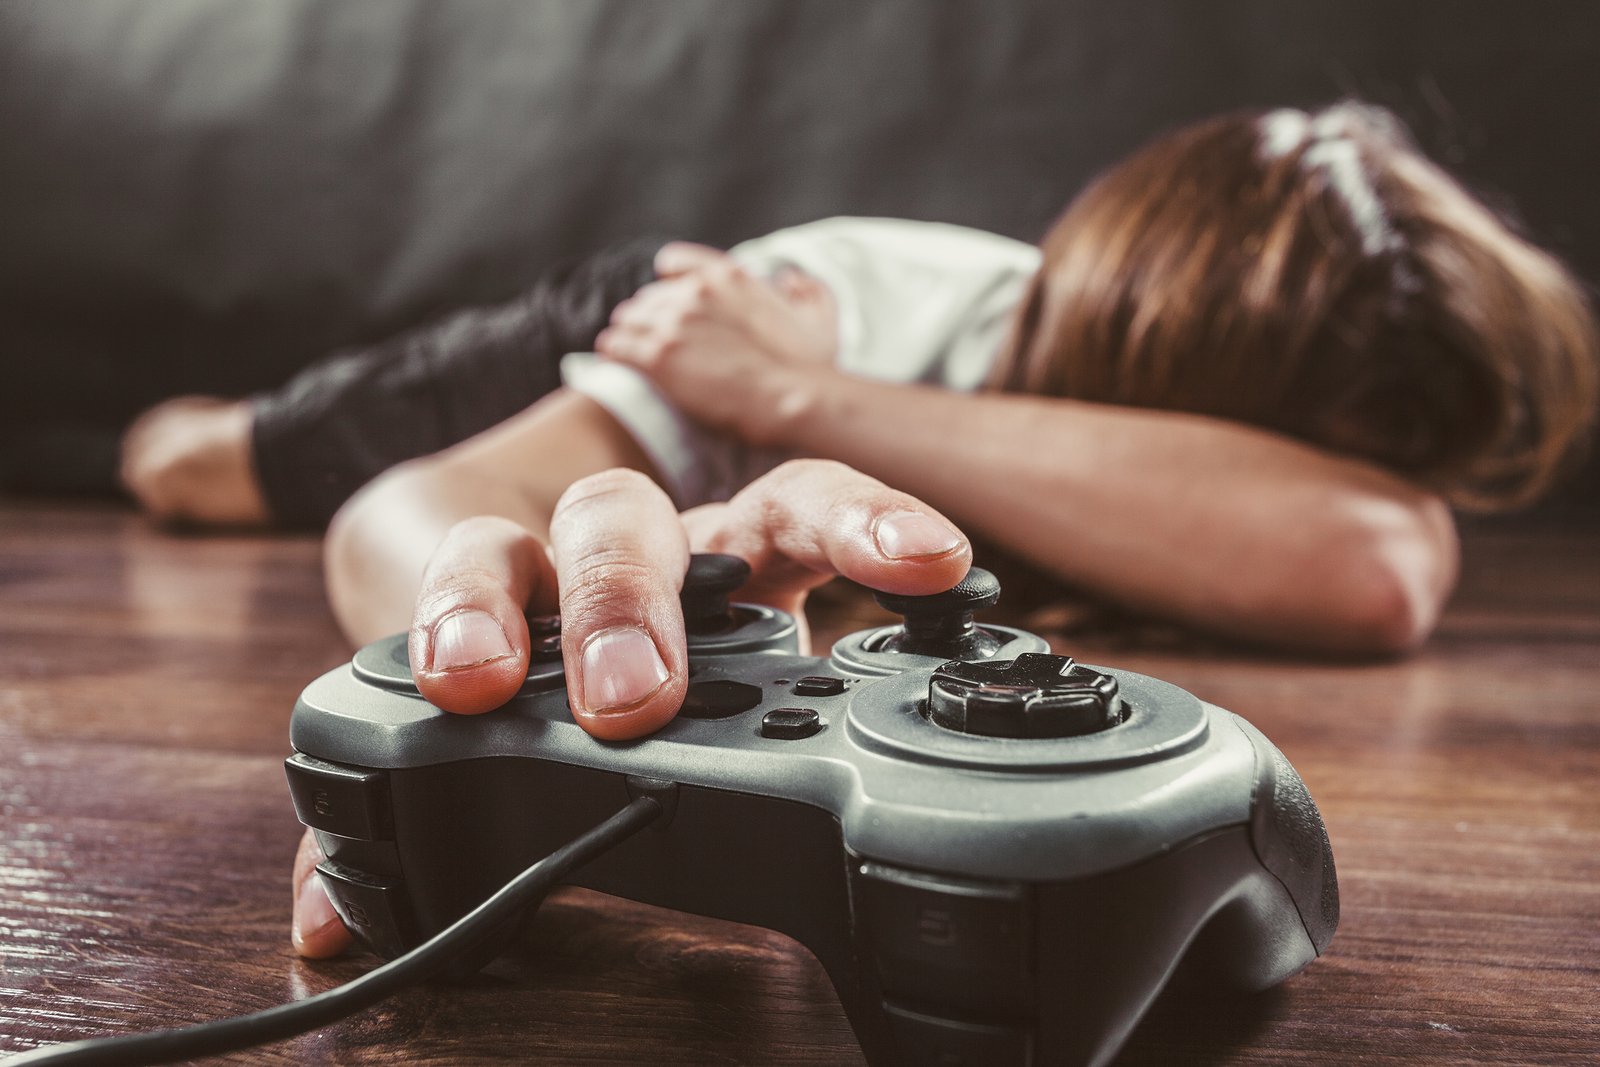 Essay about video games effect on children